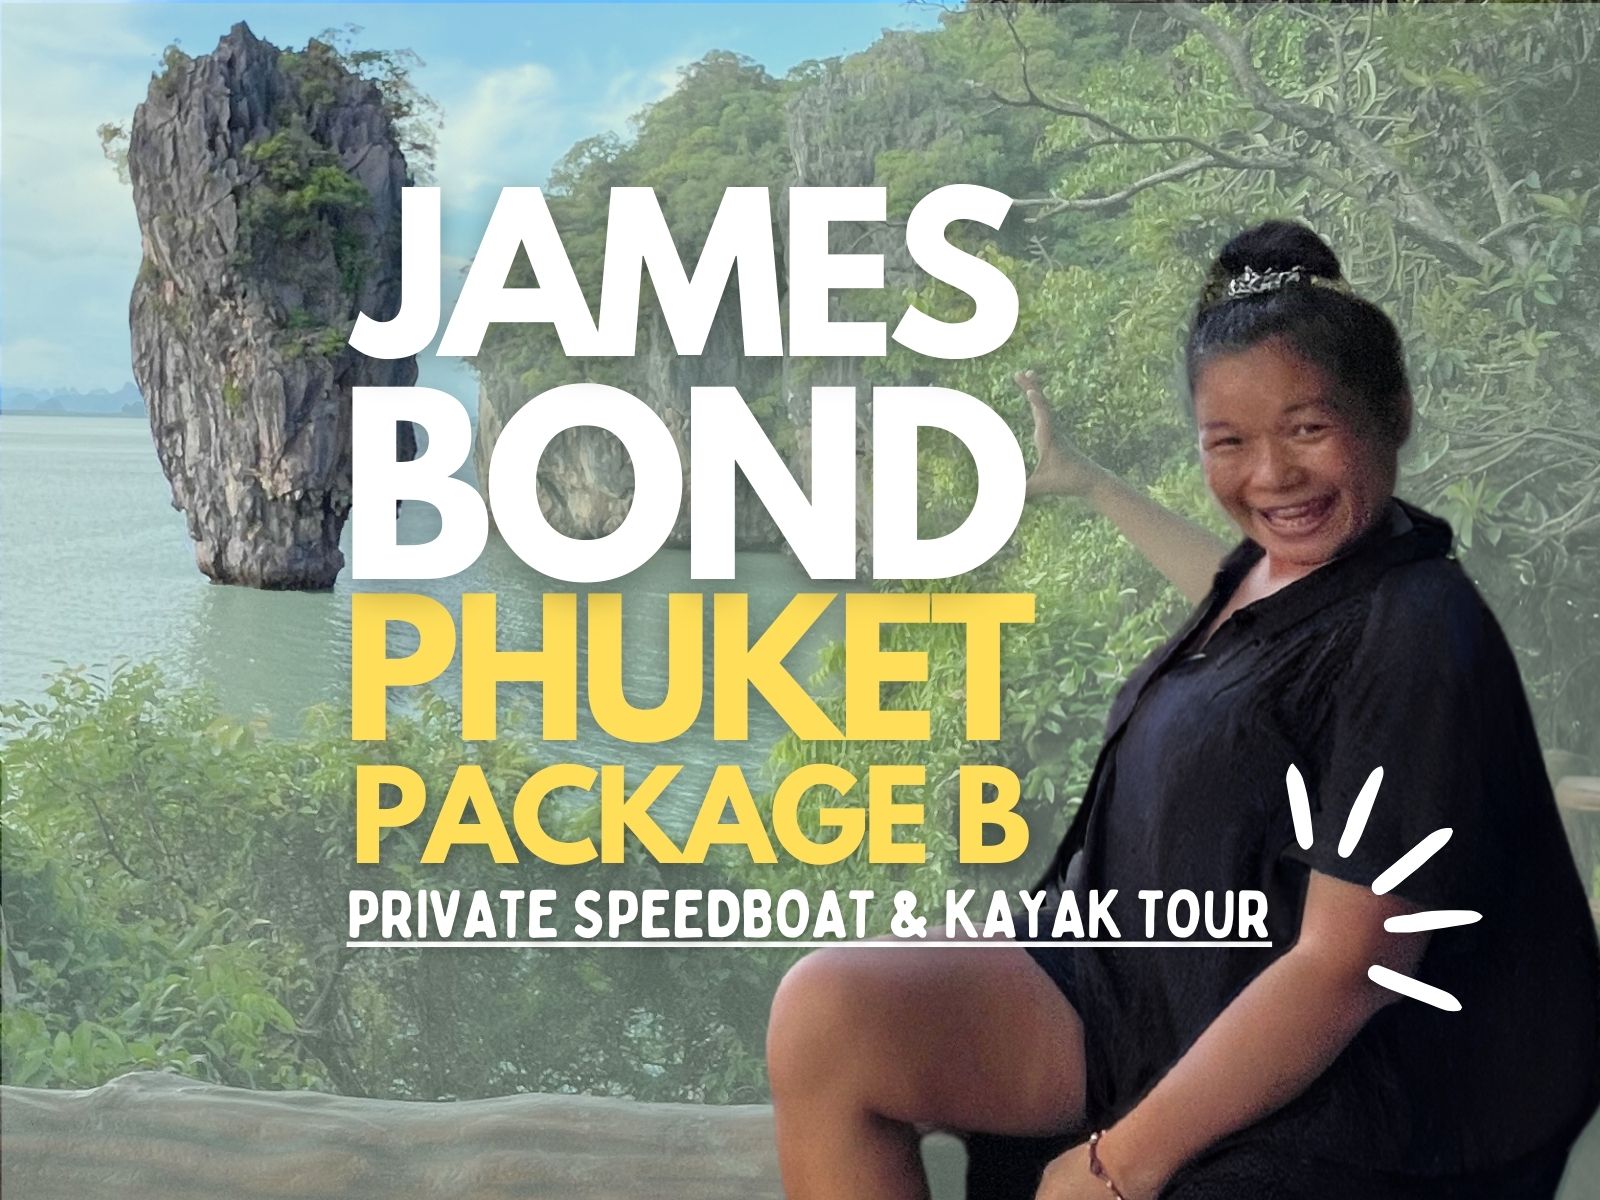 A Private Speedboat Charter 5 Star Marine Simba Sea Trips V Marine Five Star Thailand Tour Private Boat to James Bond and Phang Nga Bay starting in Phuket